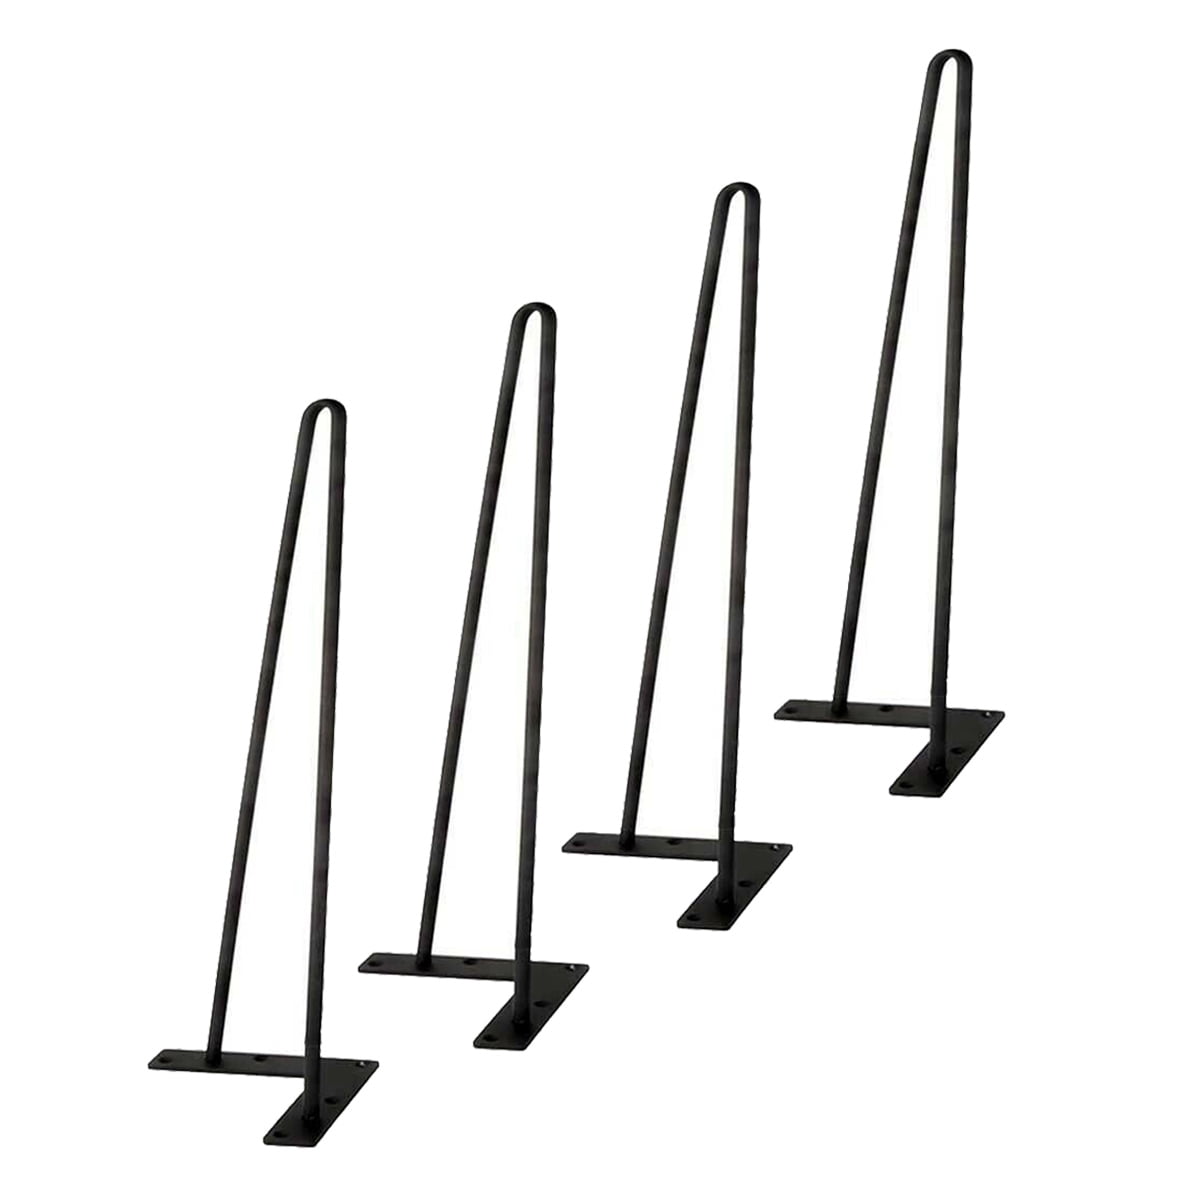 Hot 8" 28" 2-Rod Coffee Table Metal Hairpin Legs Solid Iron Bar Black Set of 4 